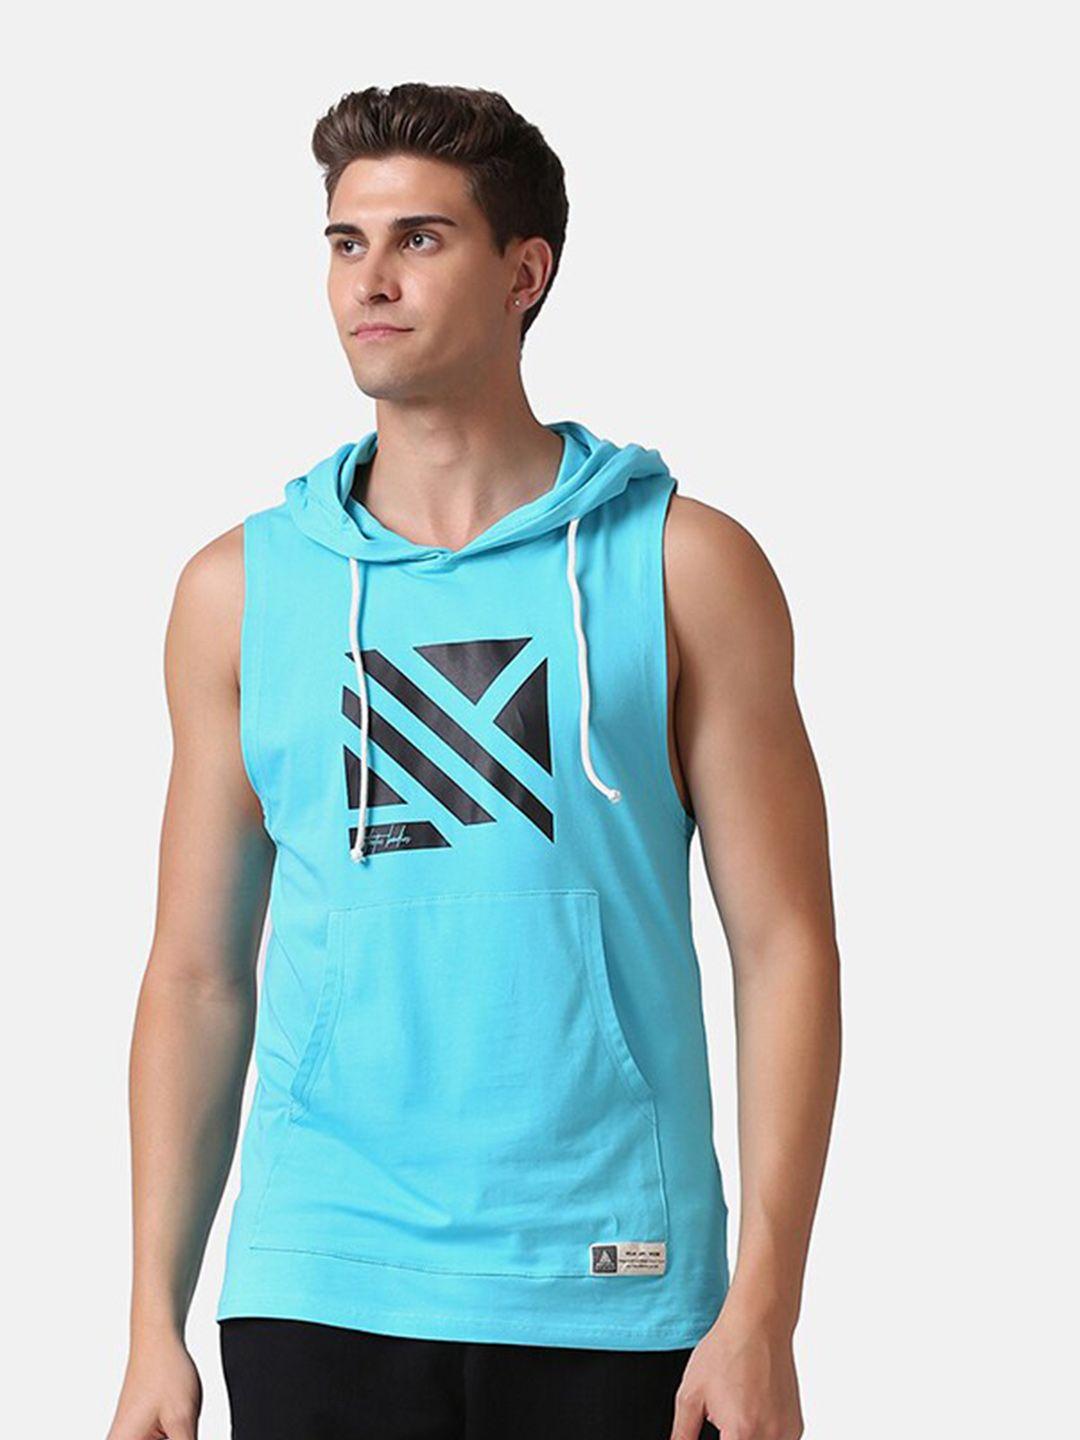 aesthetic bodies men turquoise blue printed slim fit t-shirt